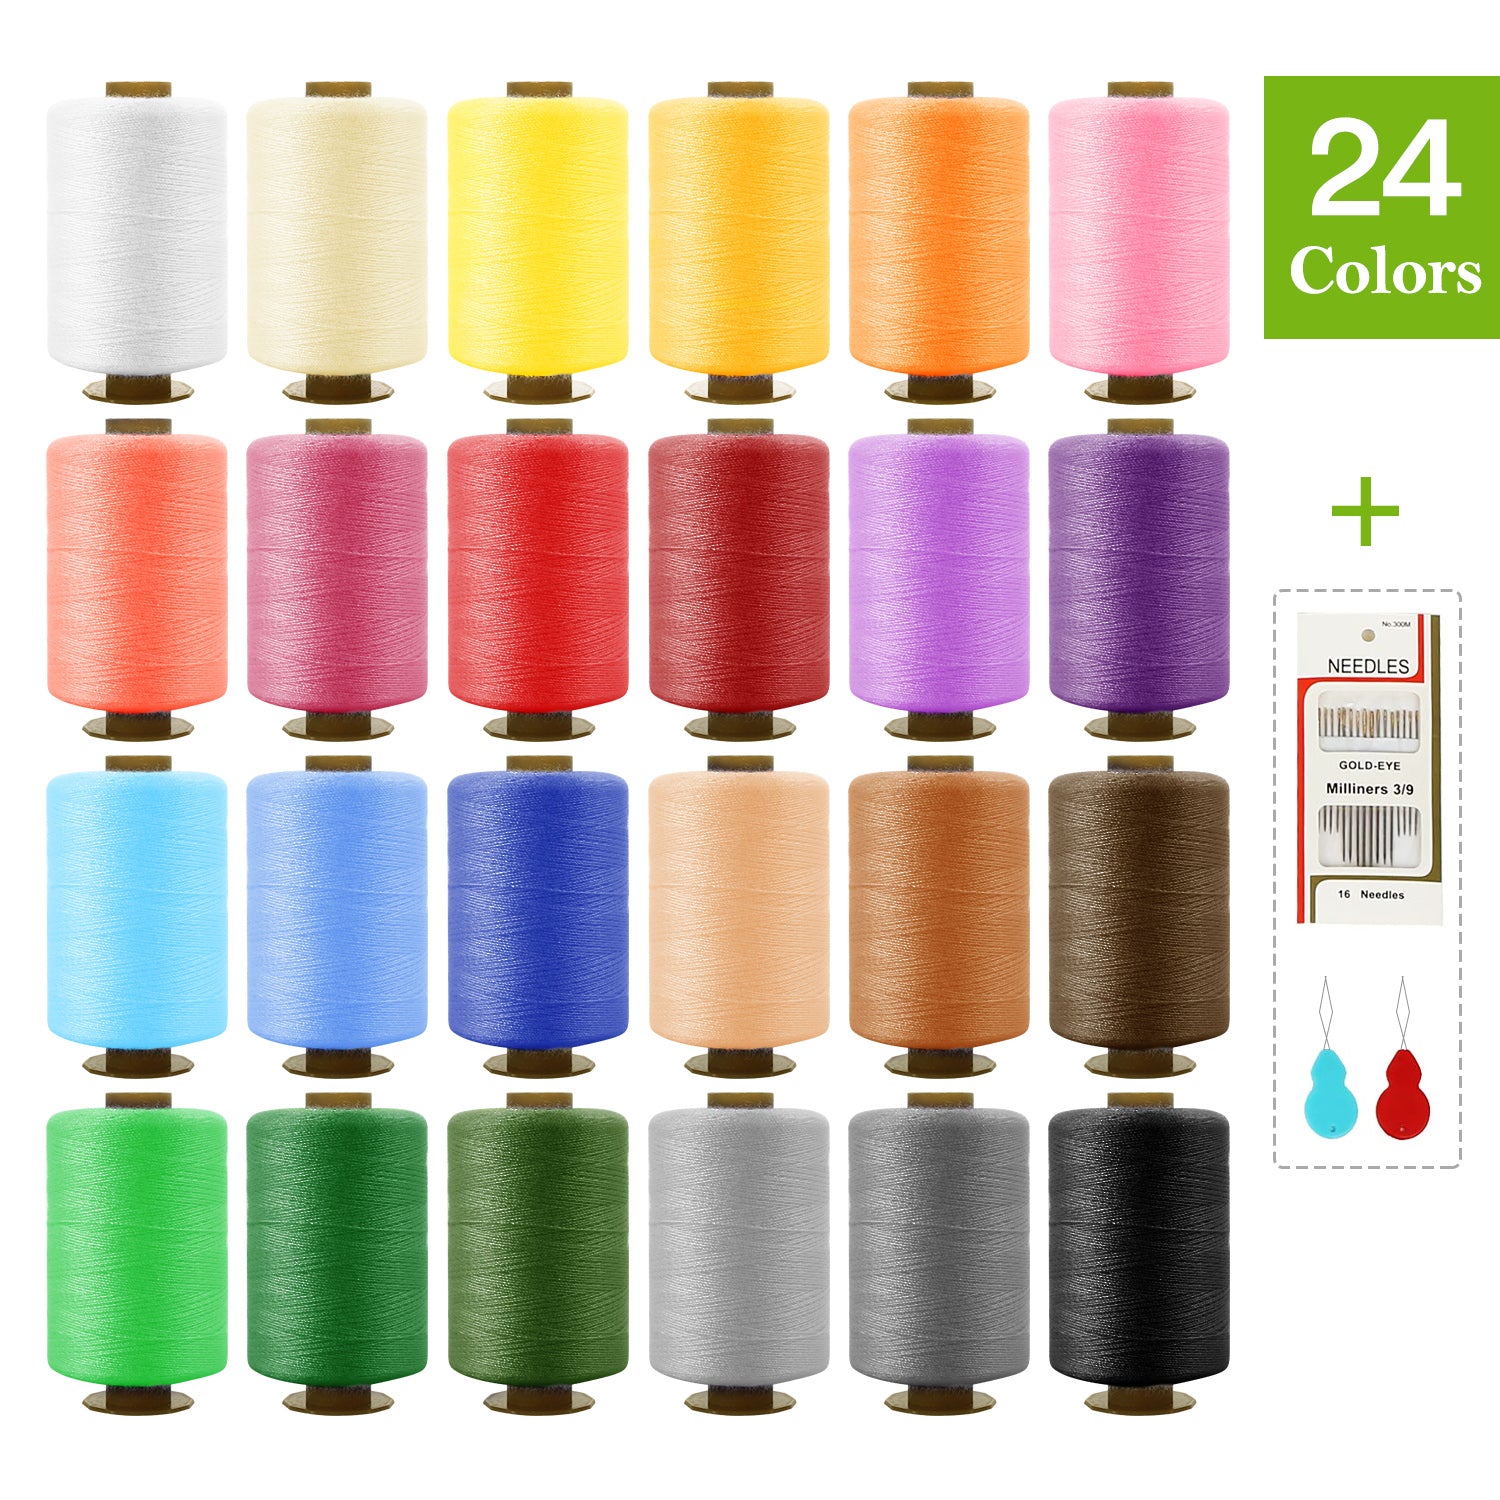 SOLEDI Sewing Thread Set With 24 Colors